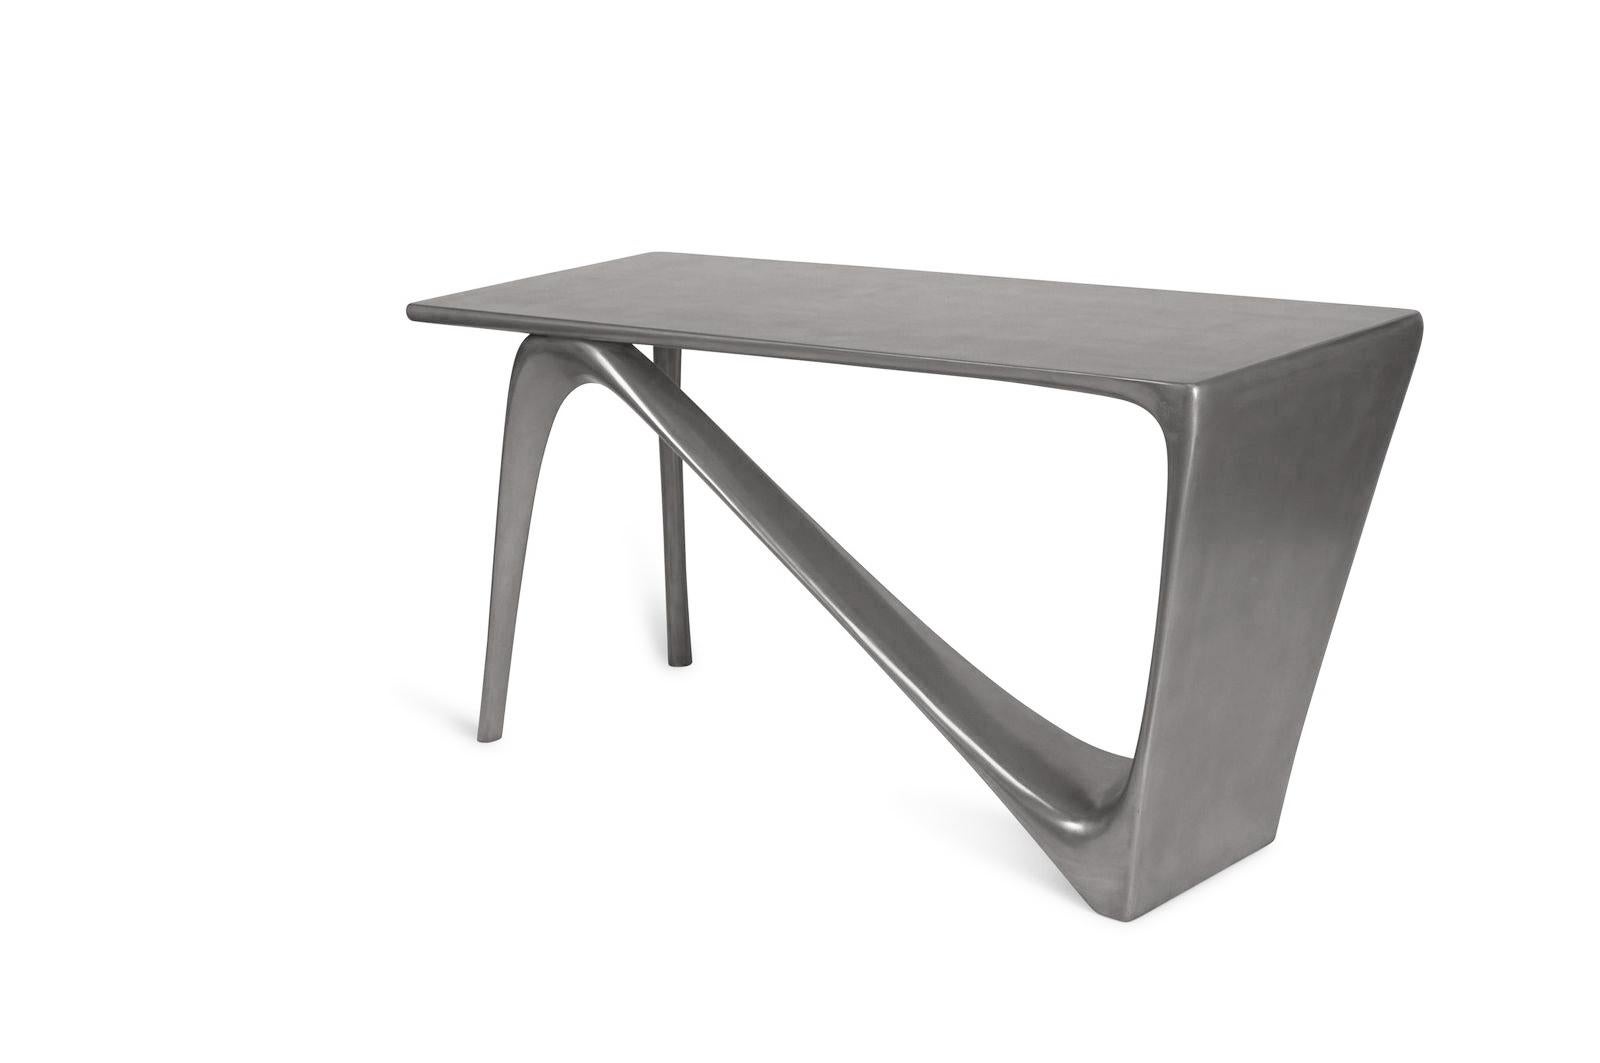 American Amorph Astra Desk in Stainless steel lacquer finish 